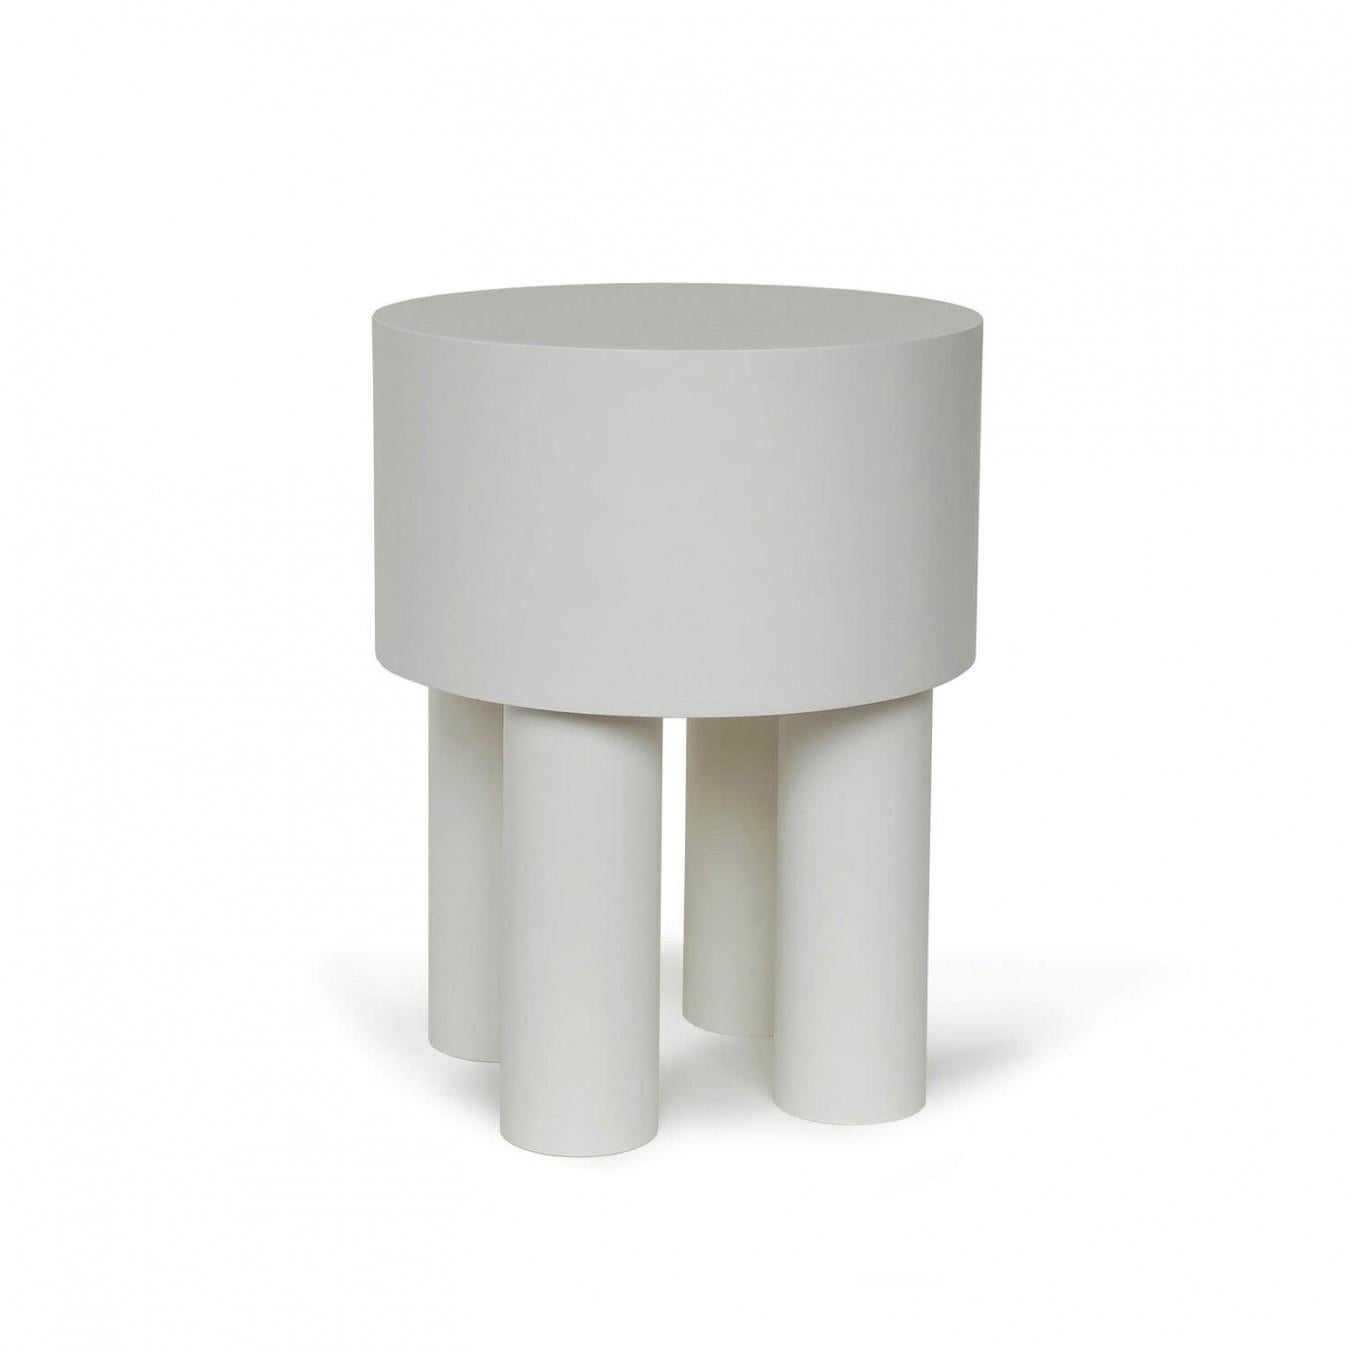 Contemporary Jesmonite Side Table - Pilotis by Malgorzata Bany.

Inspired by support columns that lift a building above ground or water. Each piece is formed using a mould made of paper, used only once, making each piece unique. Available in